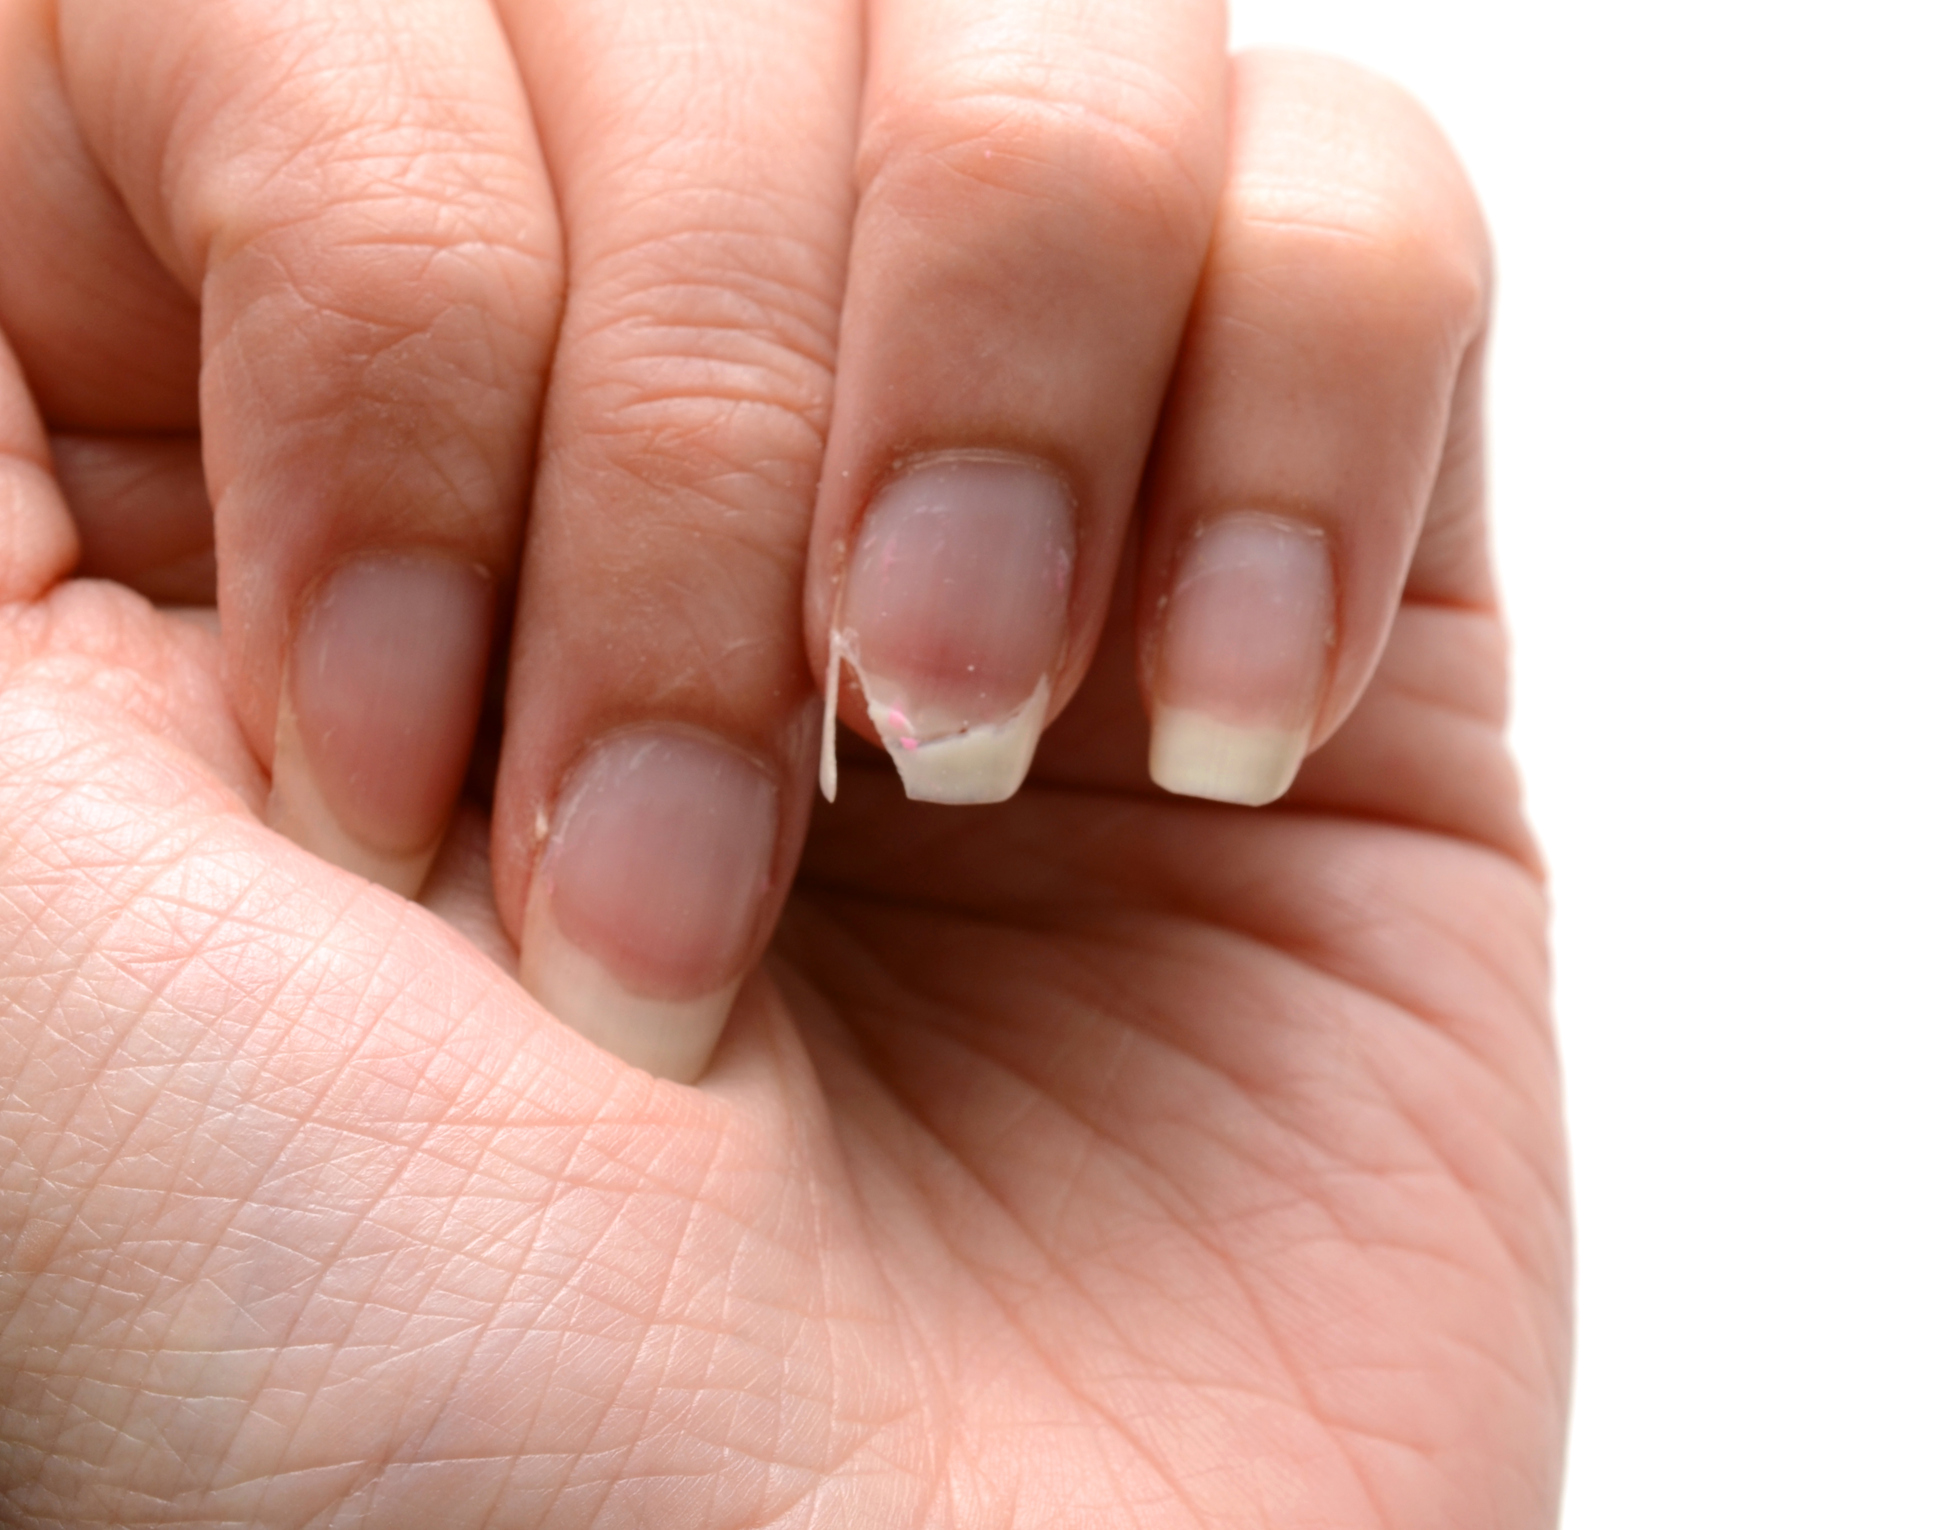 Collagen supplements may boost nail growth and appearance: Human data